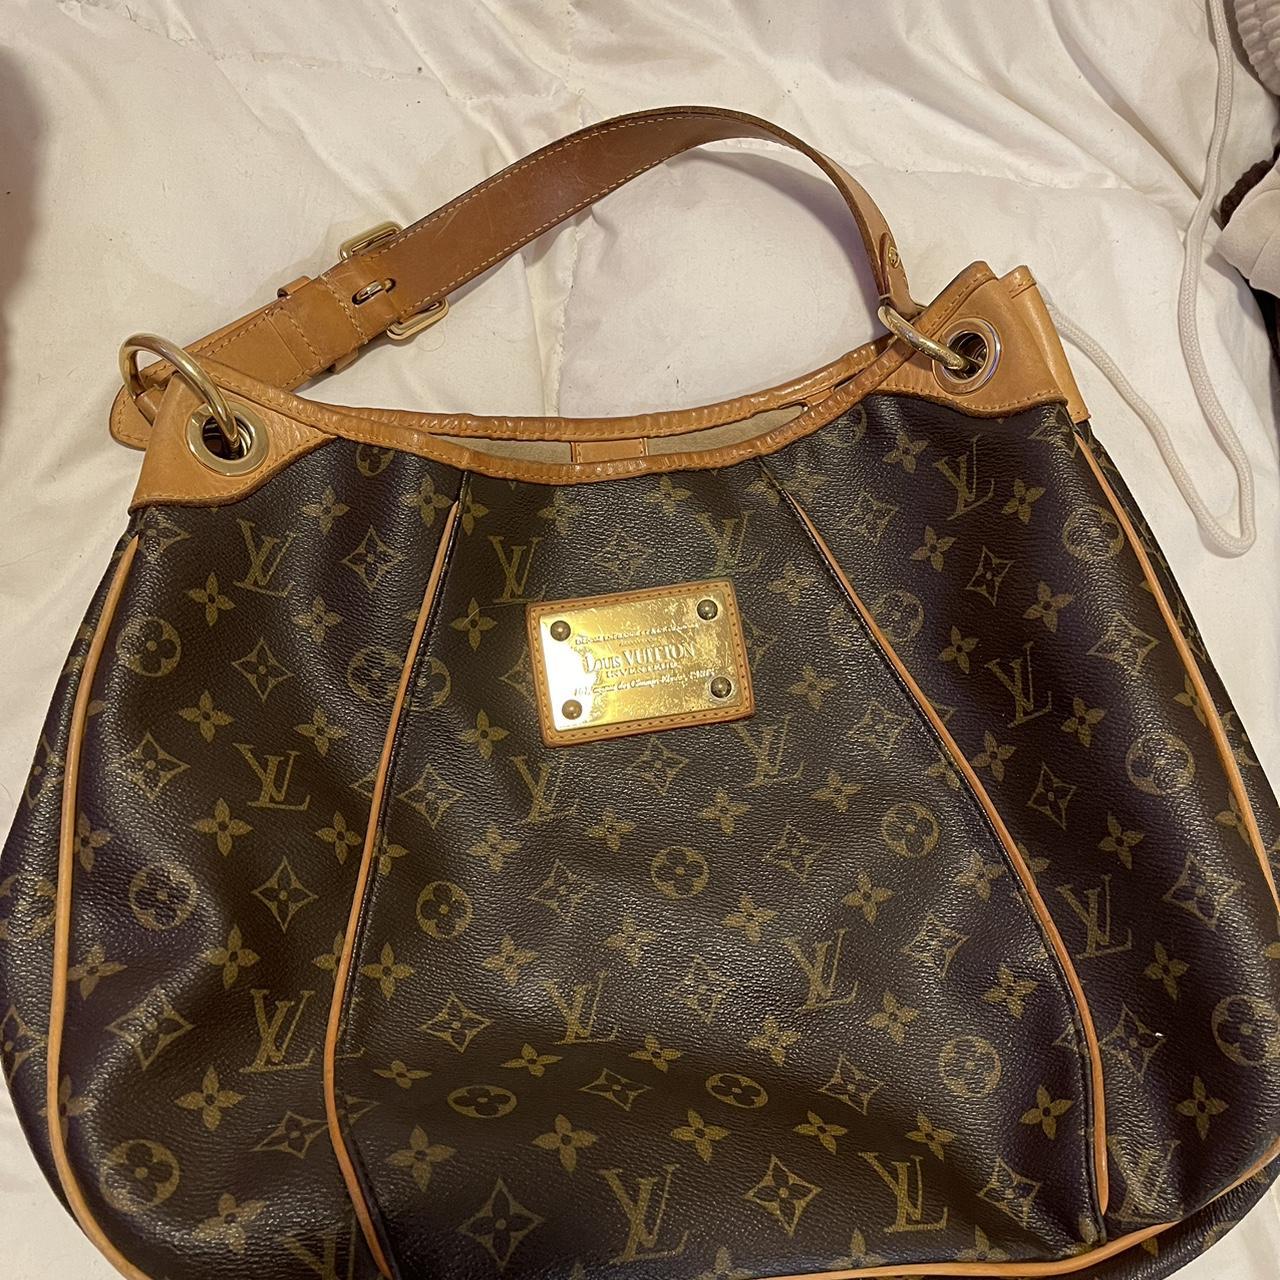 🛍Brand new V TOTE MM Louise Vuitton bag 📦Open to - Depop